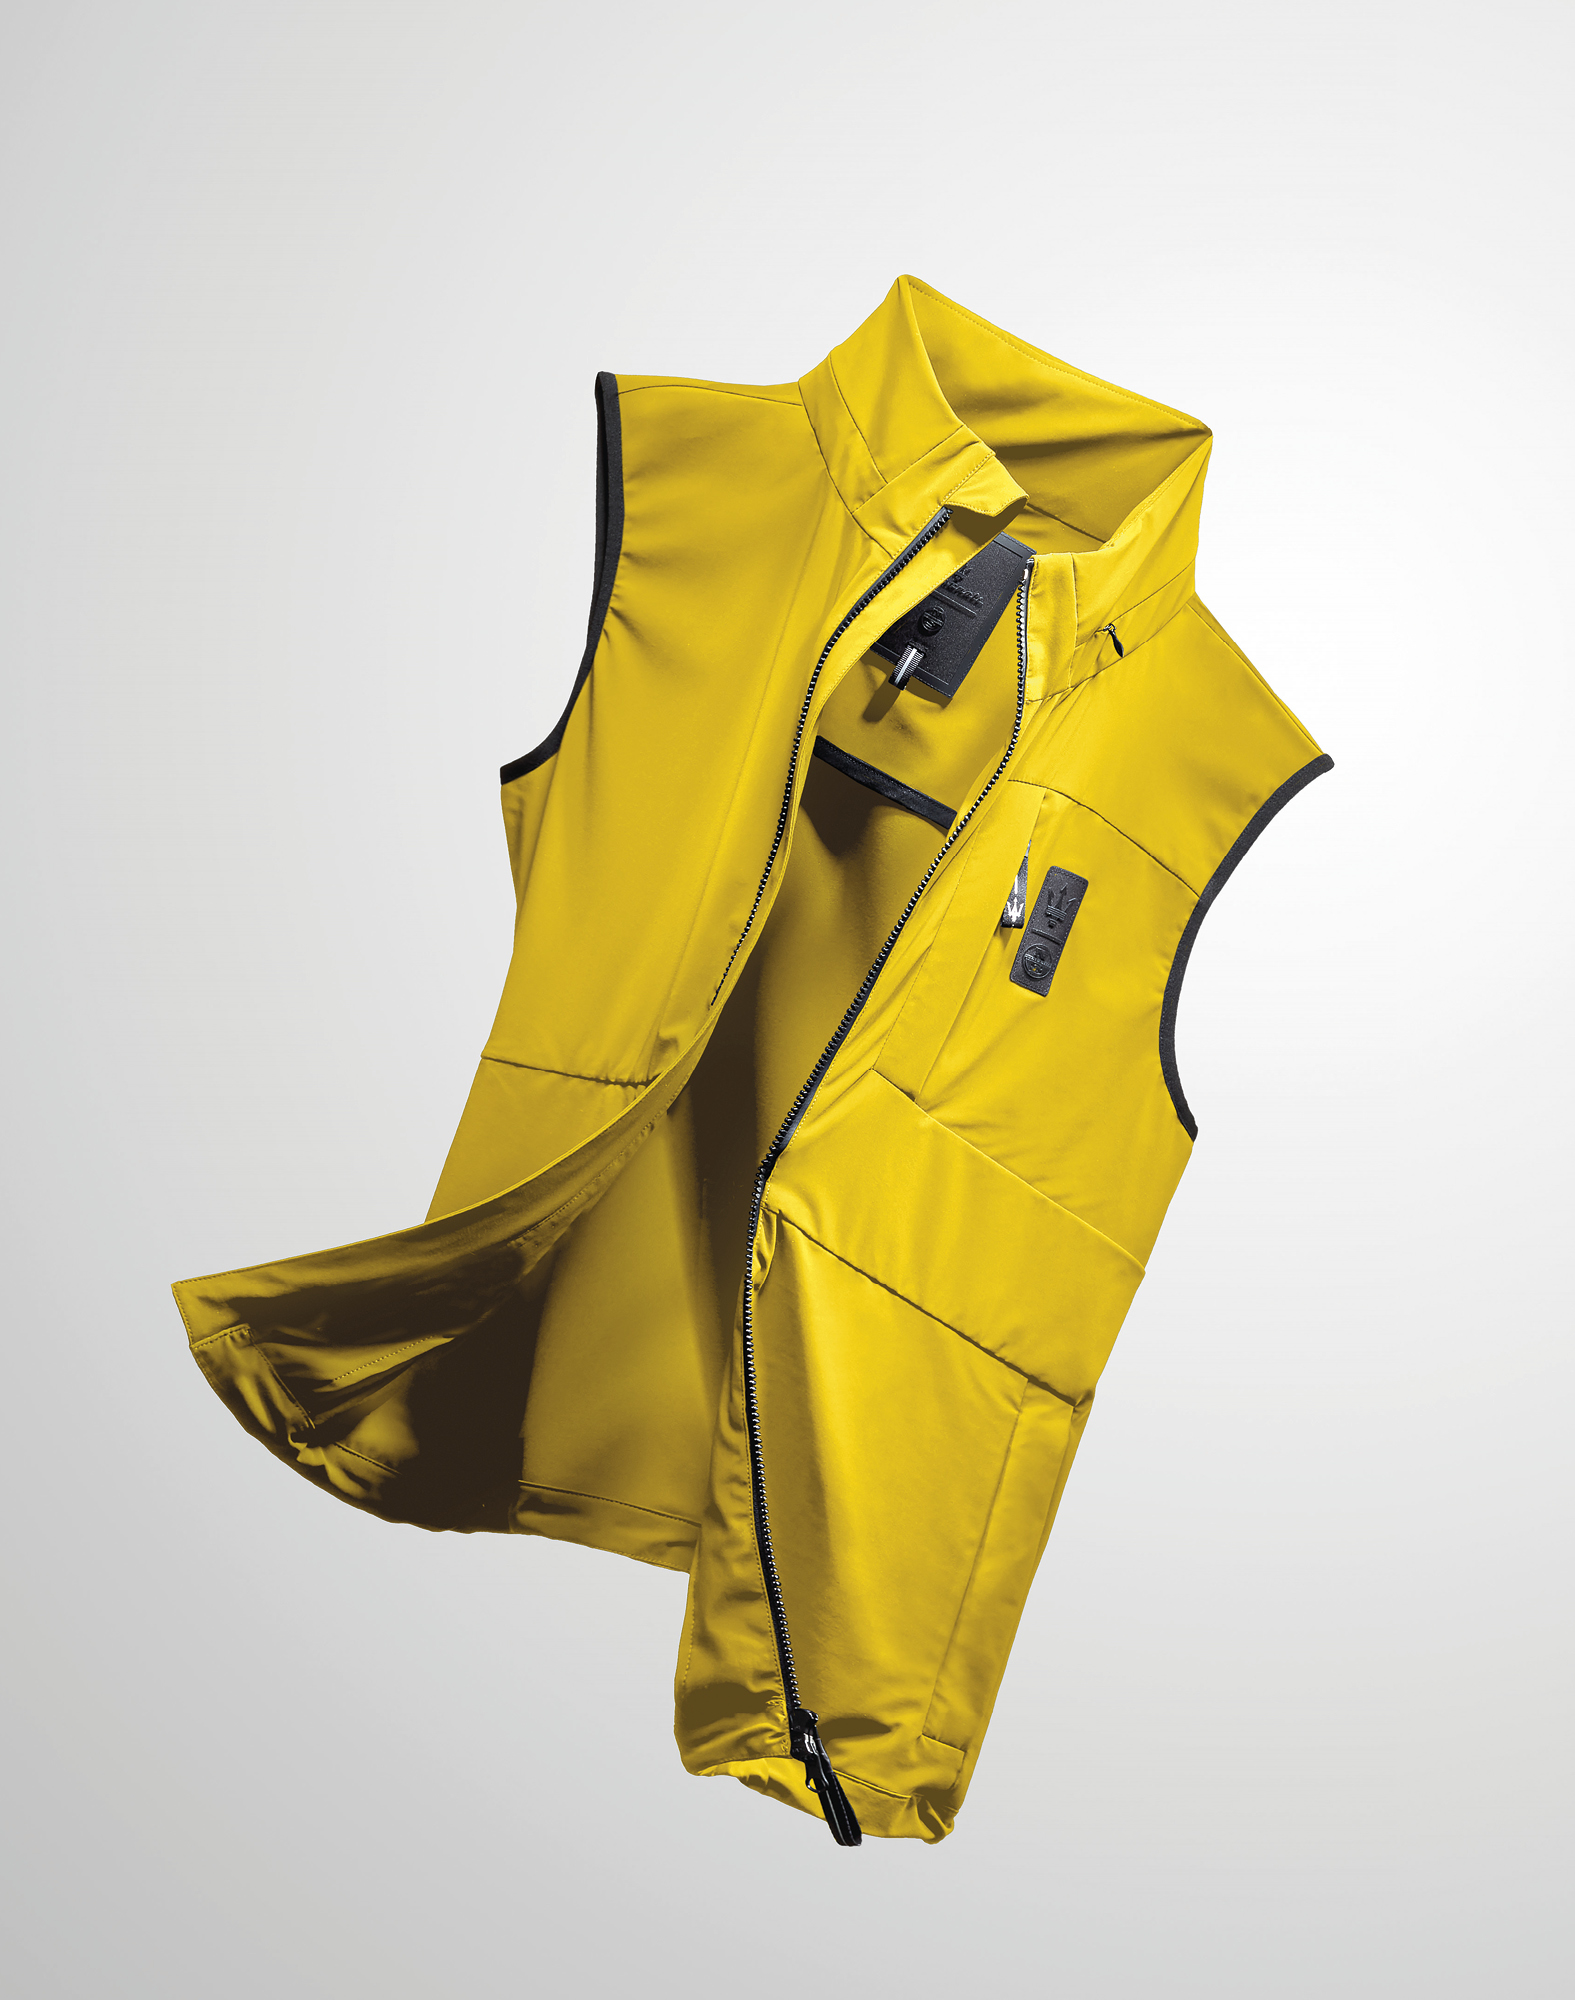 yellow gilet designed by North Sails Apparel and Maserati in 2022